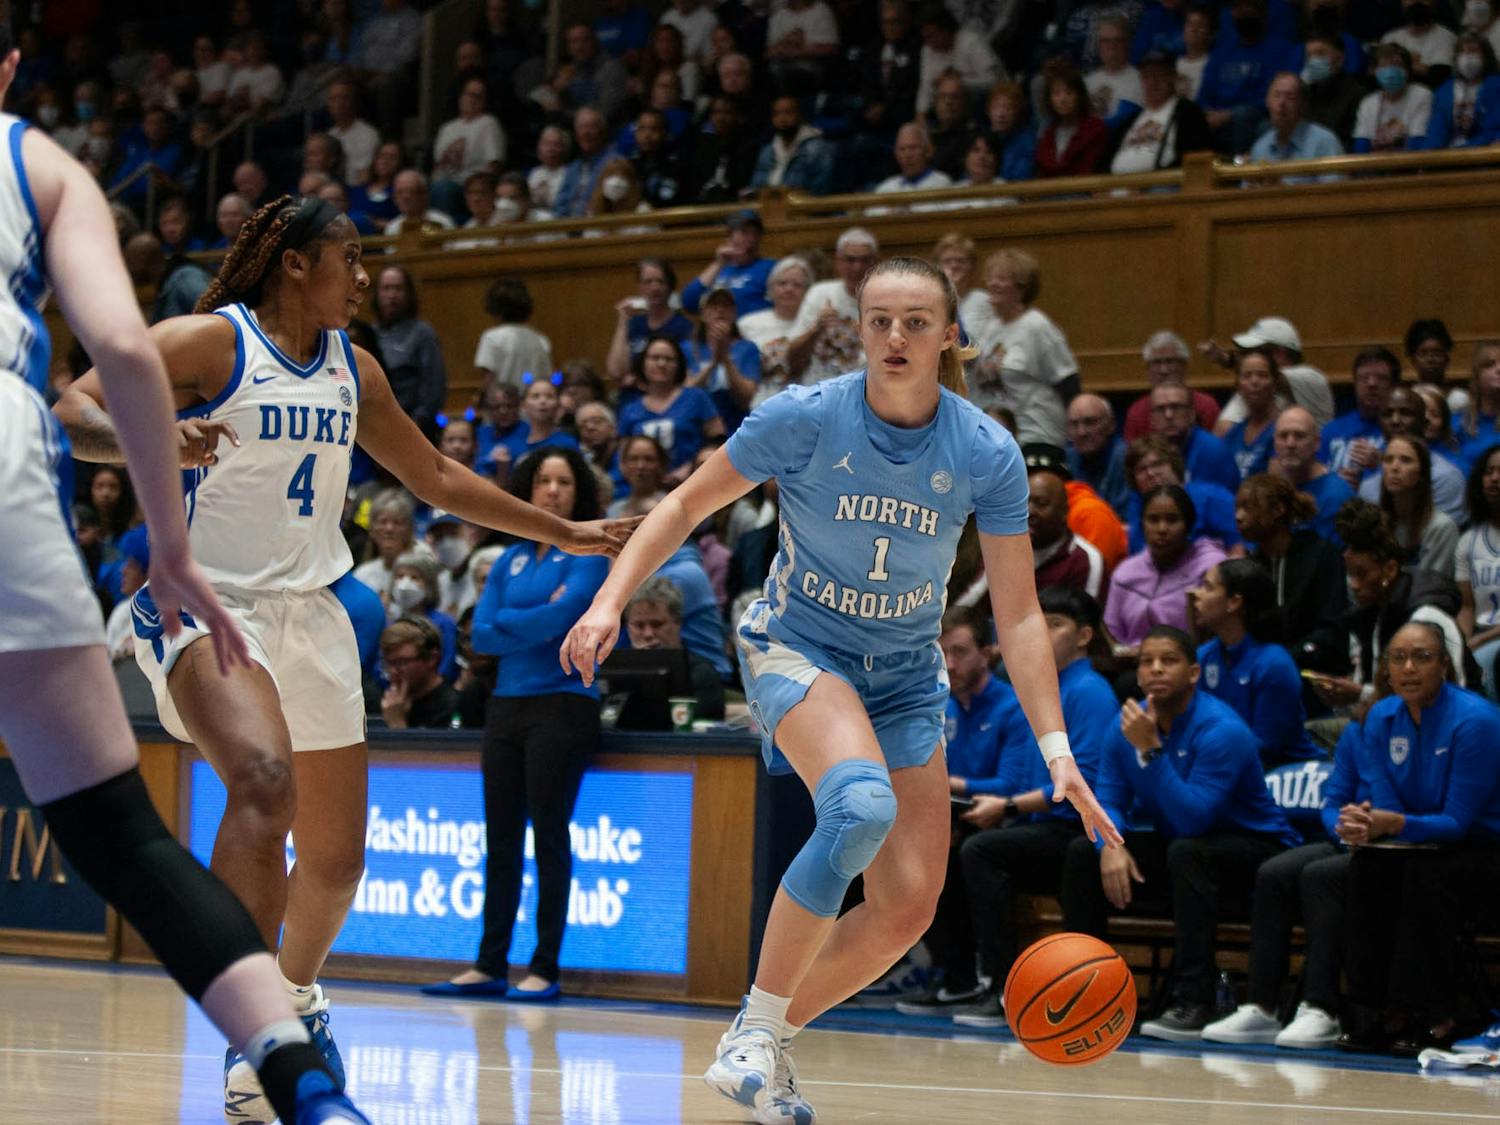 UNC junior guard Alyssa Utsby (1) dribbles the ball during the women’s basketball game against Duke on Sunday, Feb. 26, at Cameron Indoor Stadium. UNC defeated Duke 45-41, and will try and earn its third win over the Blue Devils in the ACC Tournament on Friday.&nbsp;